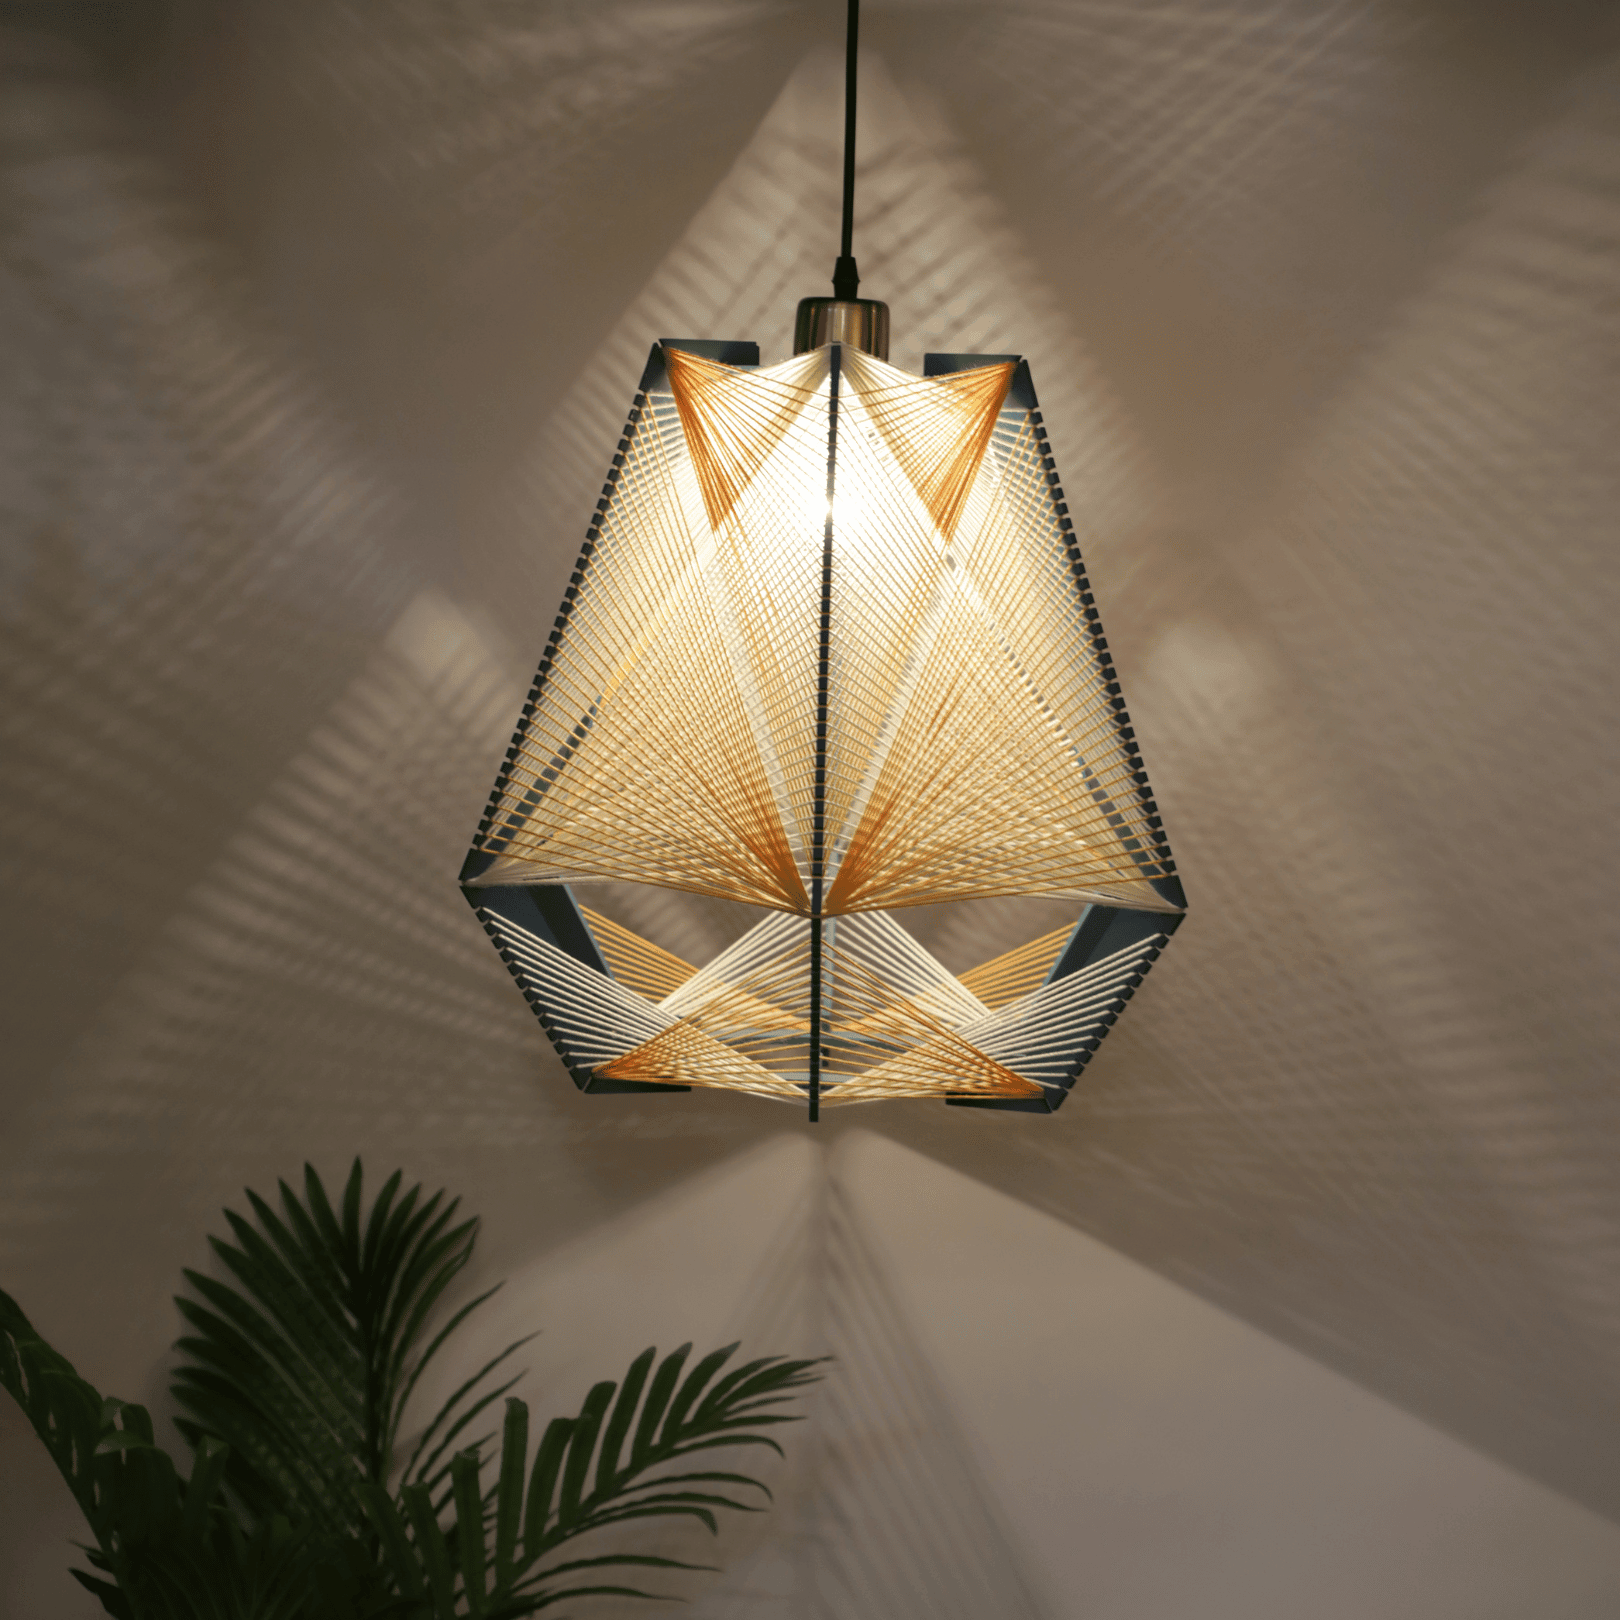 Jyotik Handcrafted Pendant Light by The Light Library